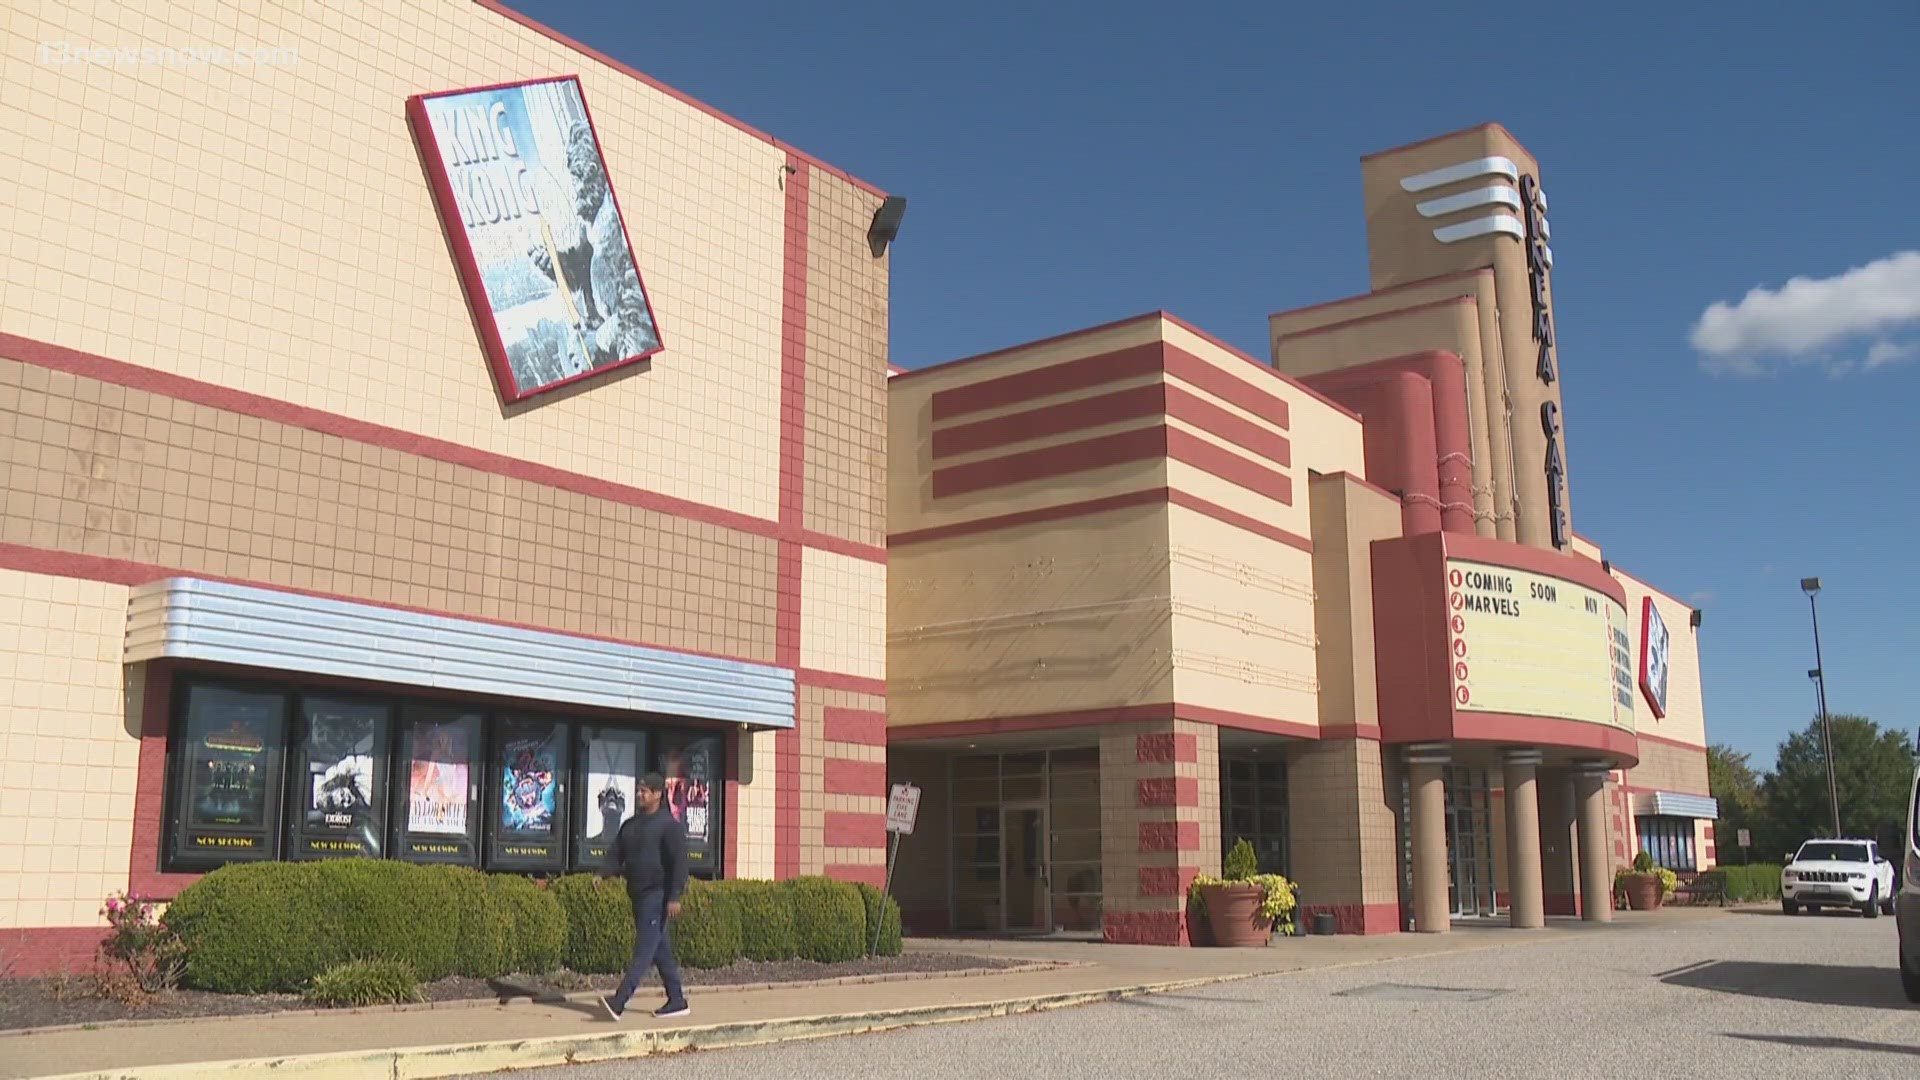 The end of a lease agreement is the reason behind the closure of Cinema Cafe in Hampton.